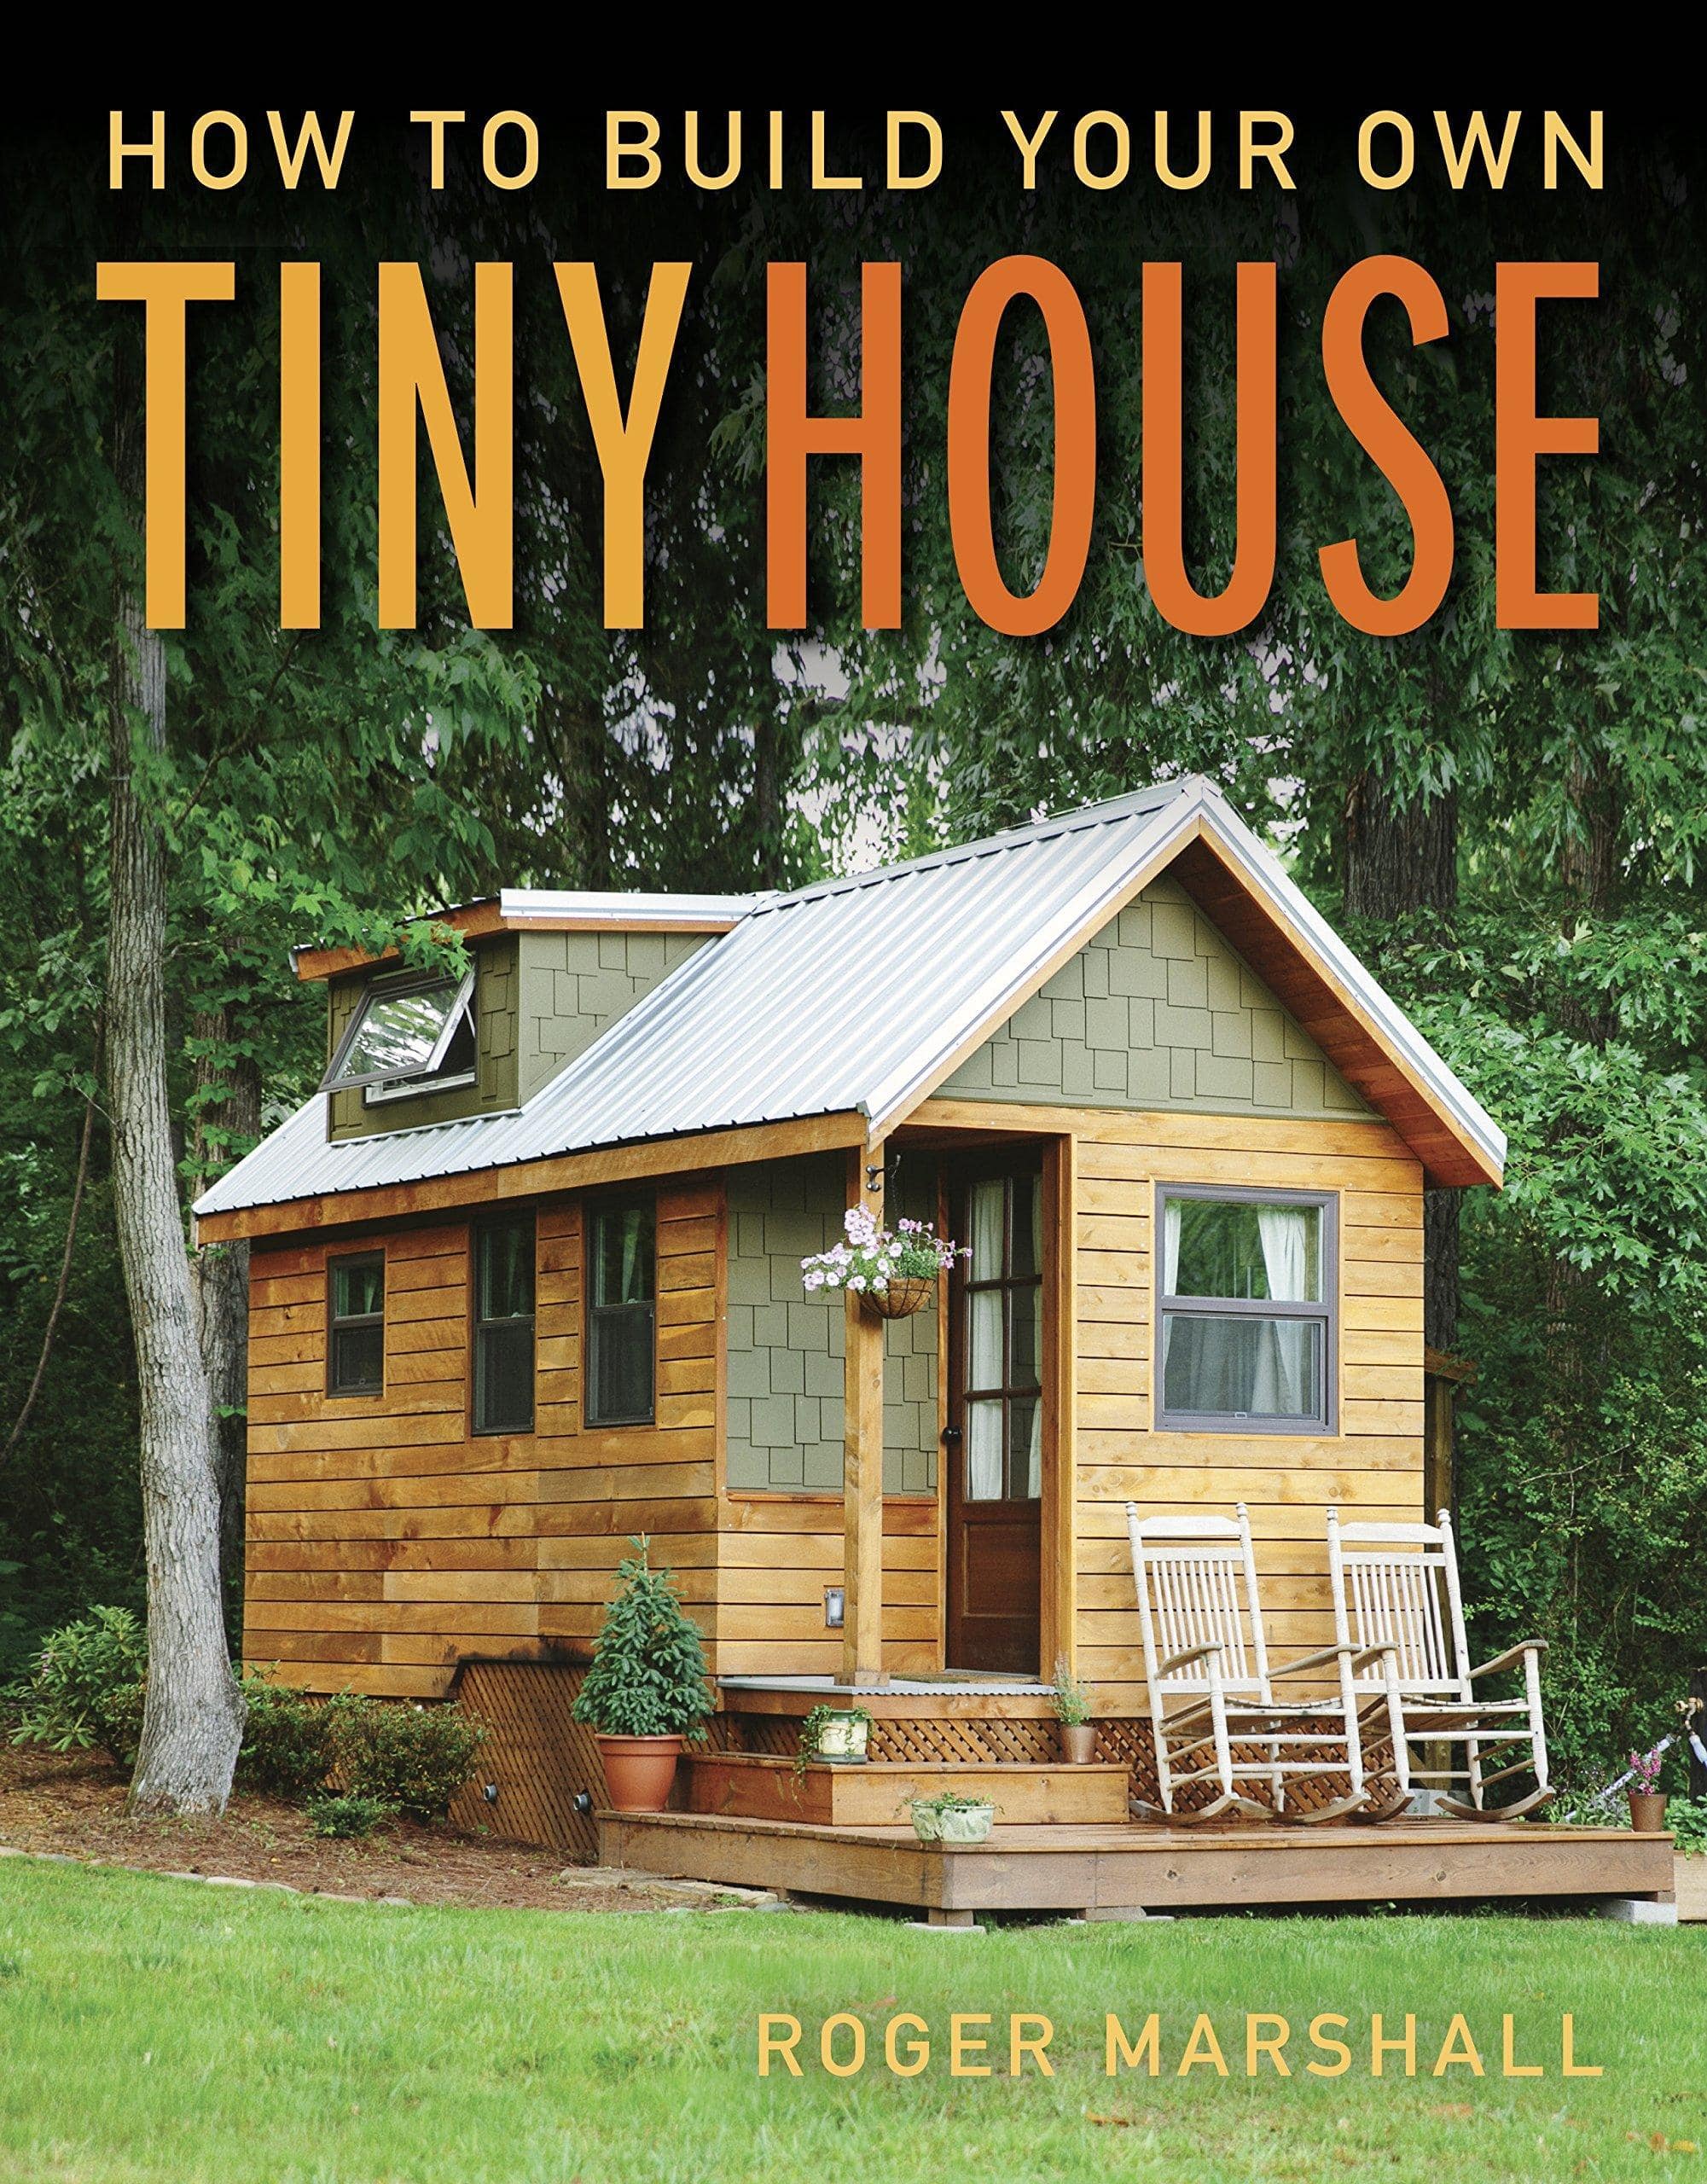 How To Build Your Own Tiny House - SureShot Books Publishing LLC